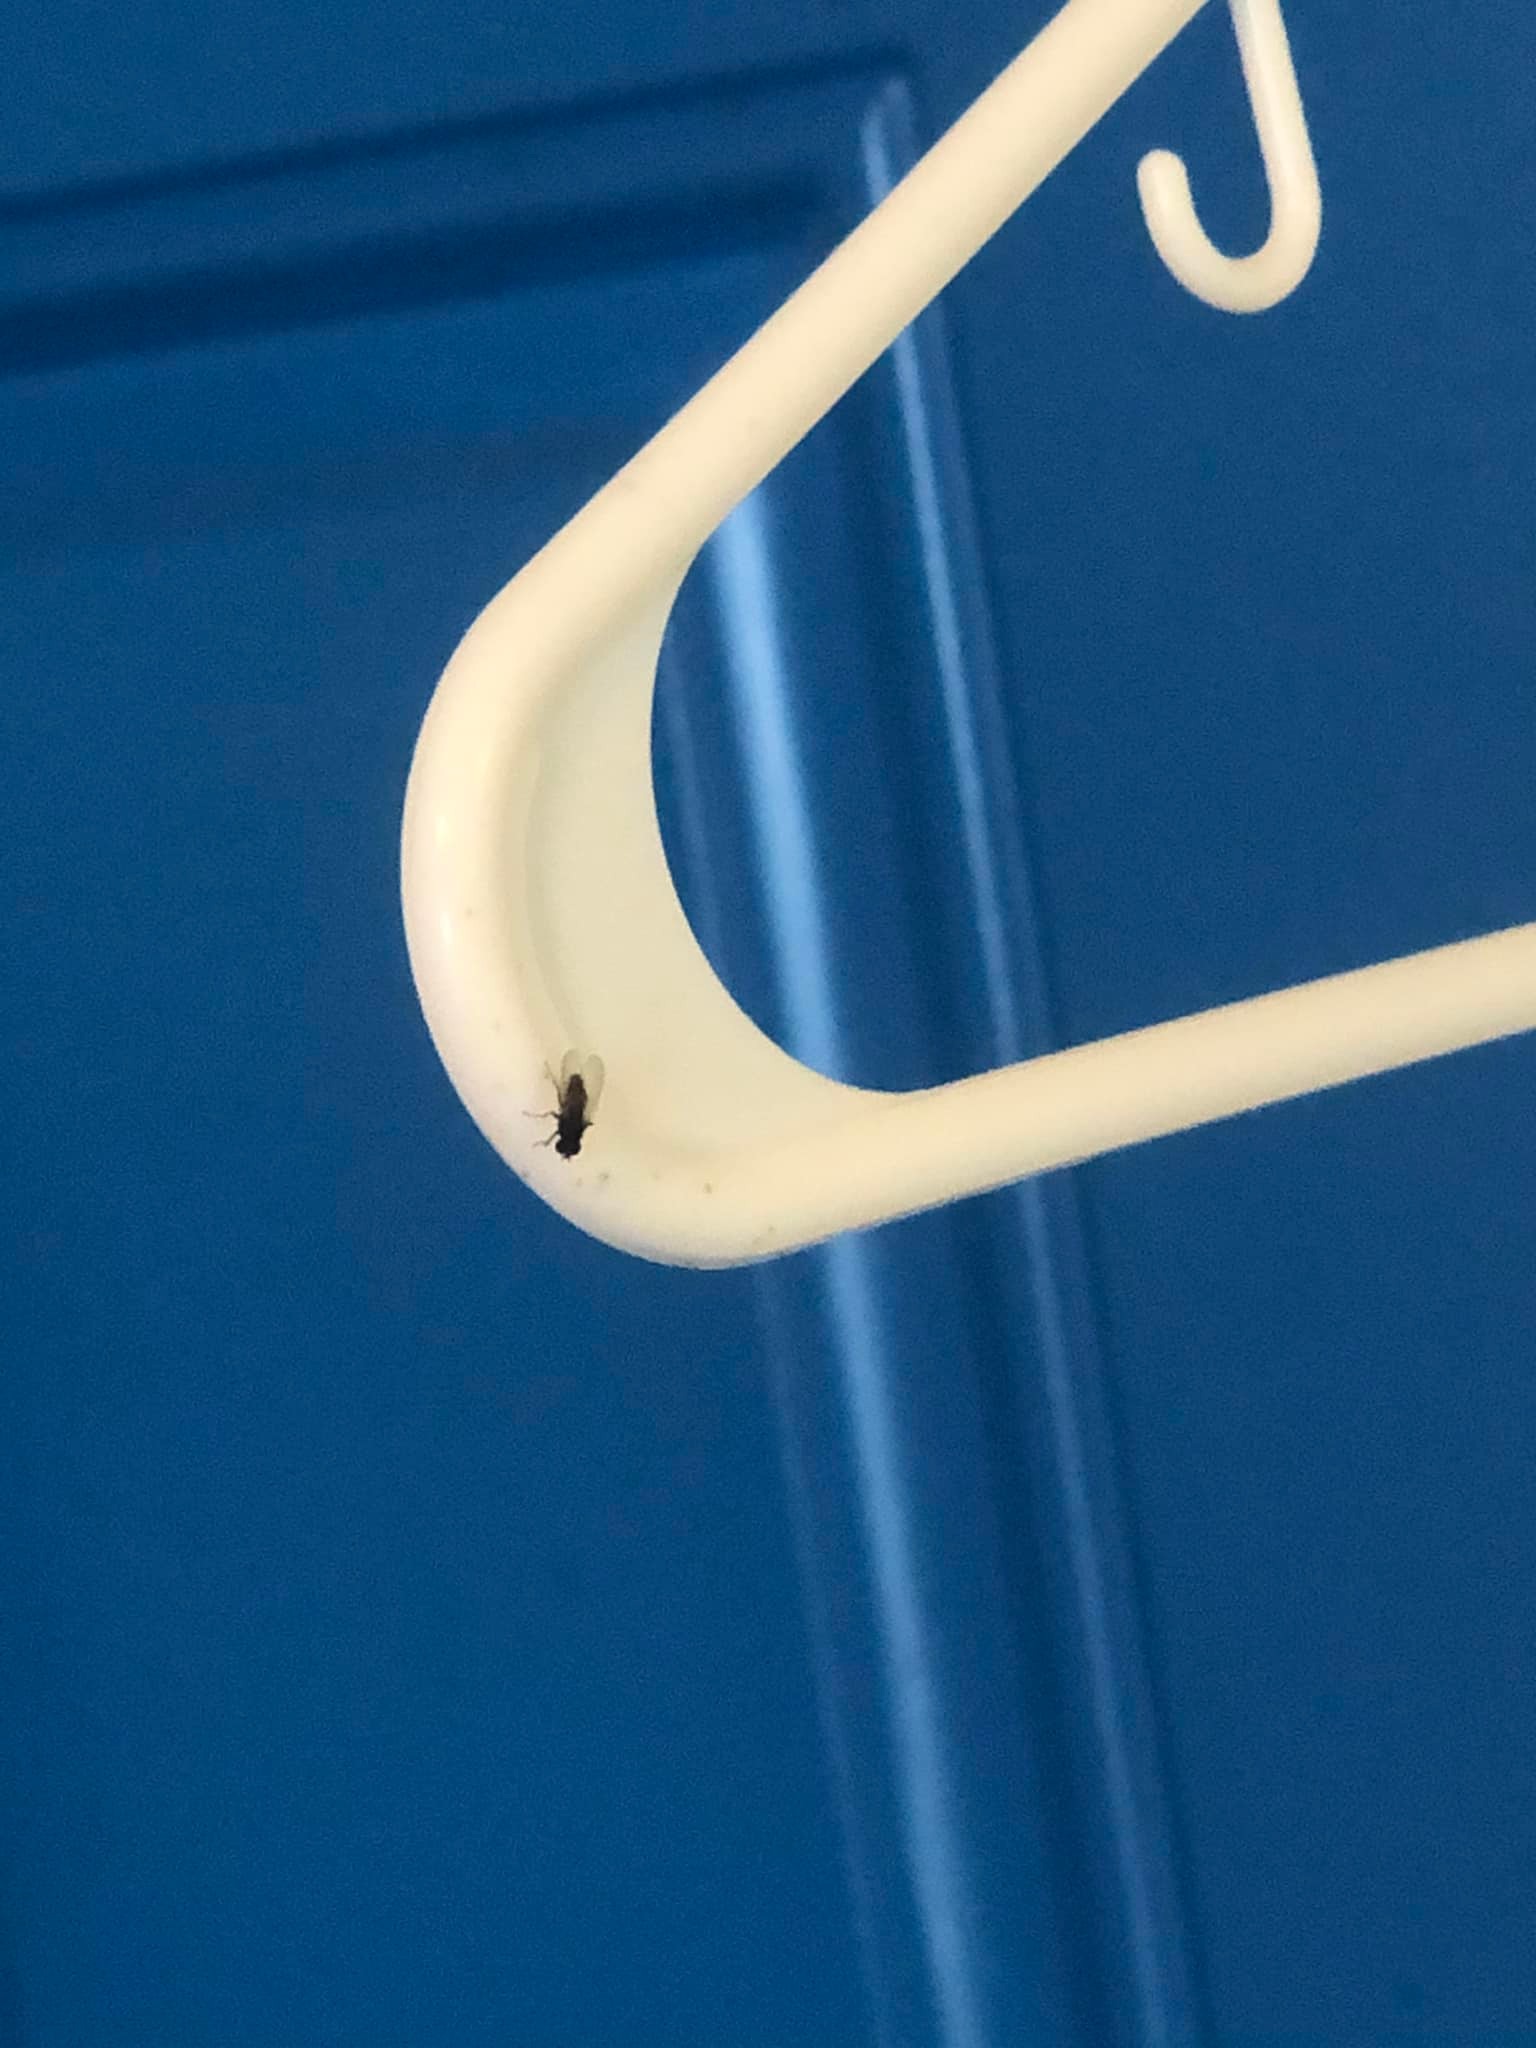 Lil housefly sitting on the corner of a coathanger, white coathanger with a blue door in the background.